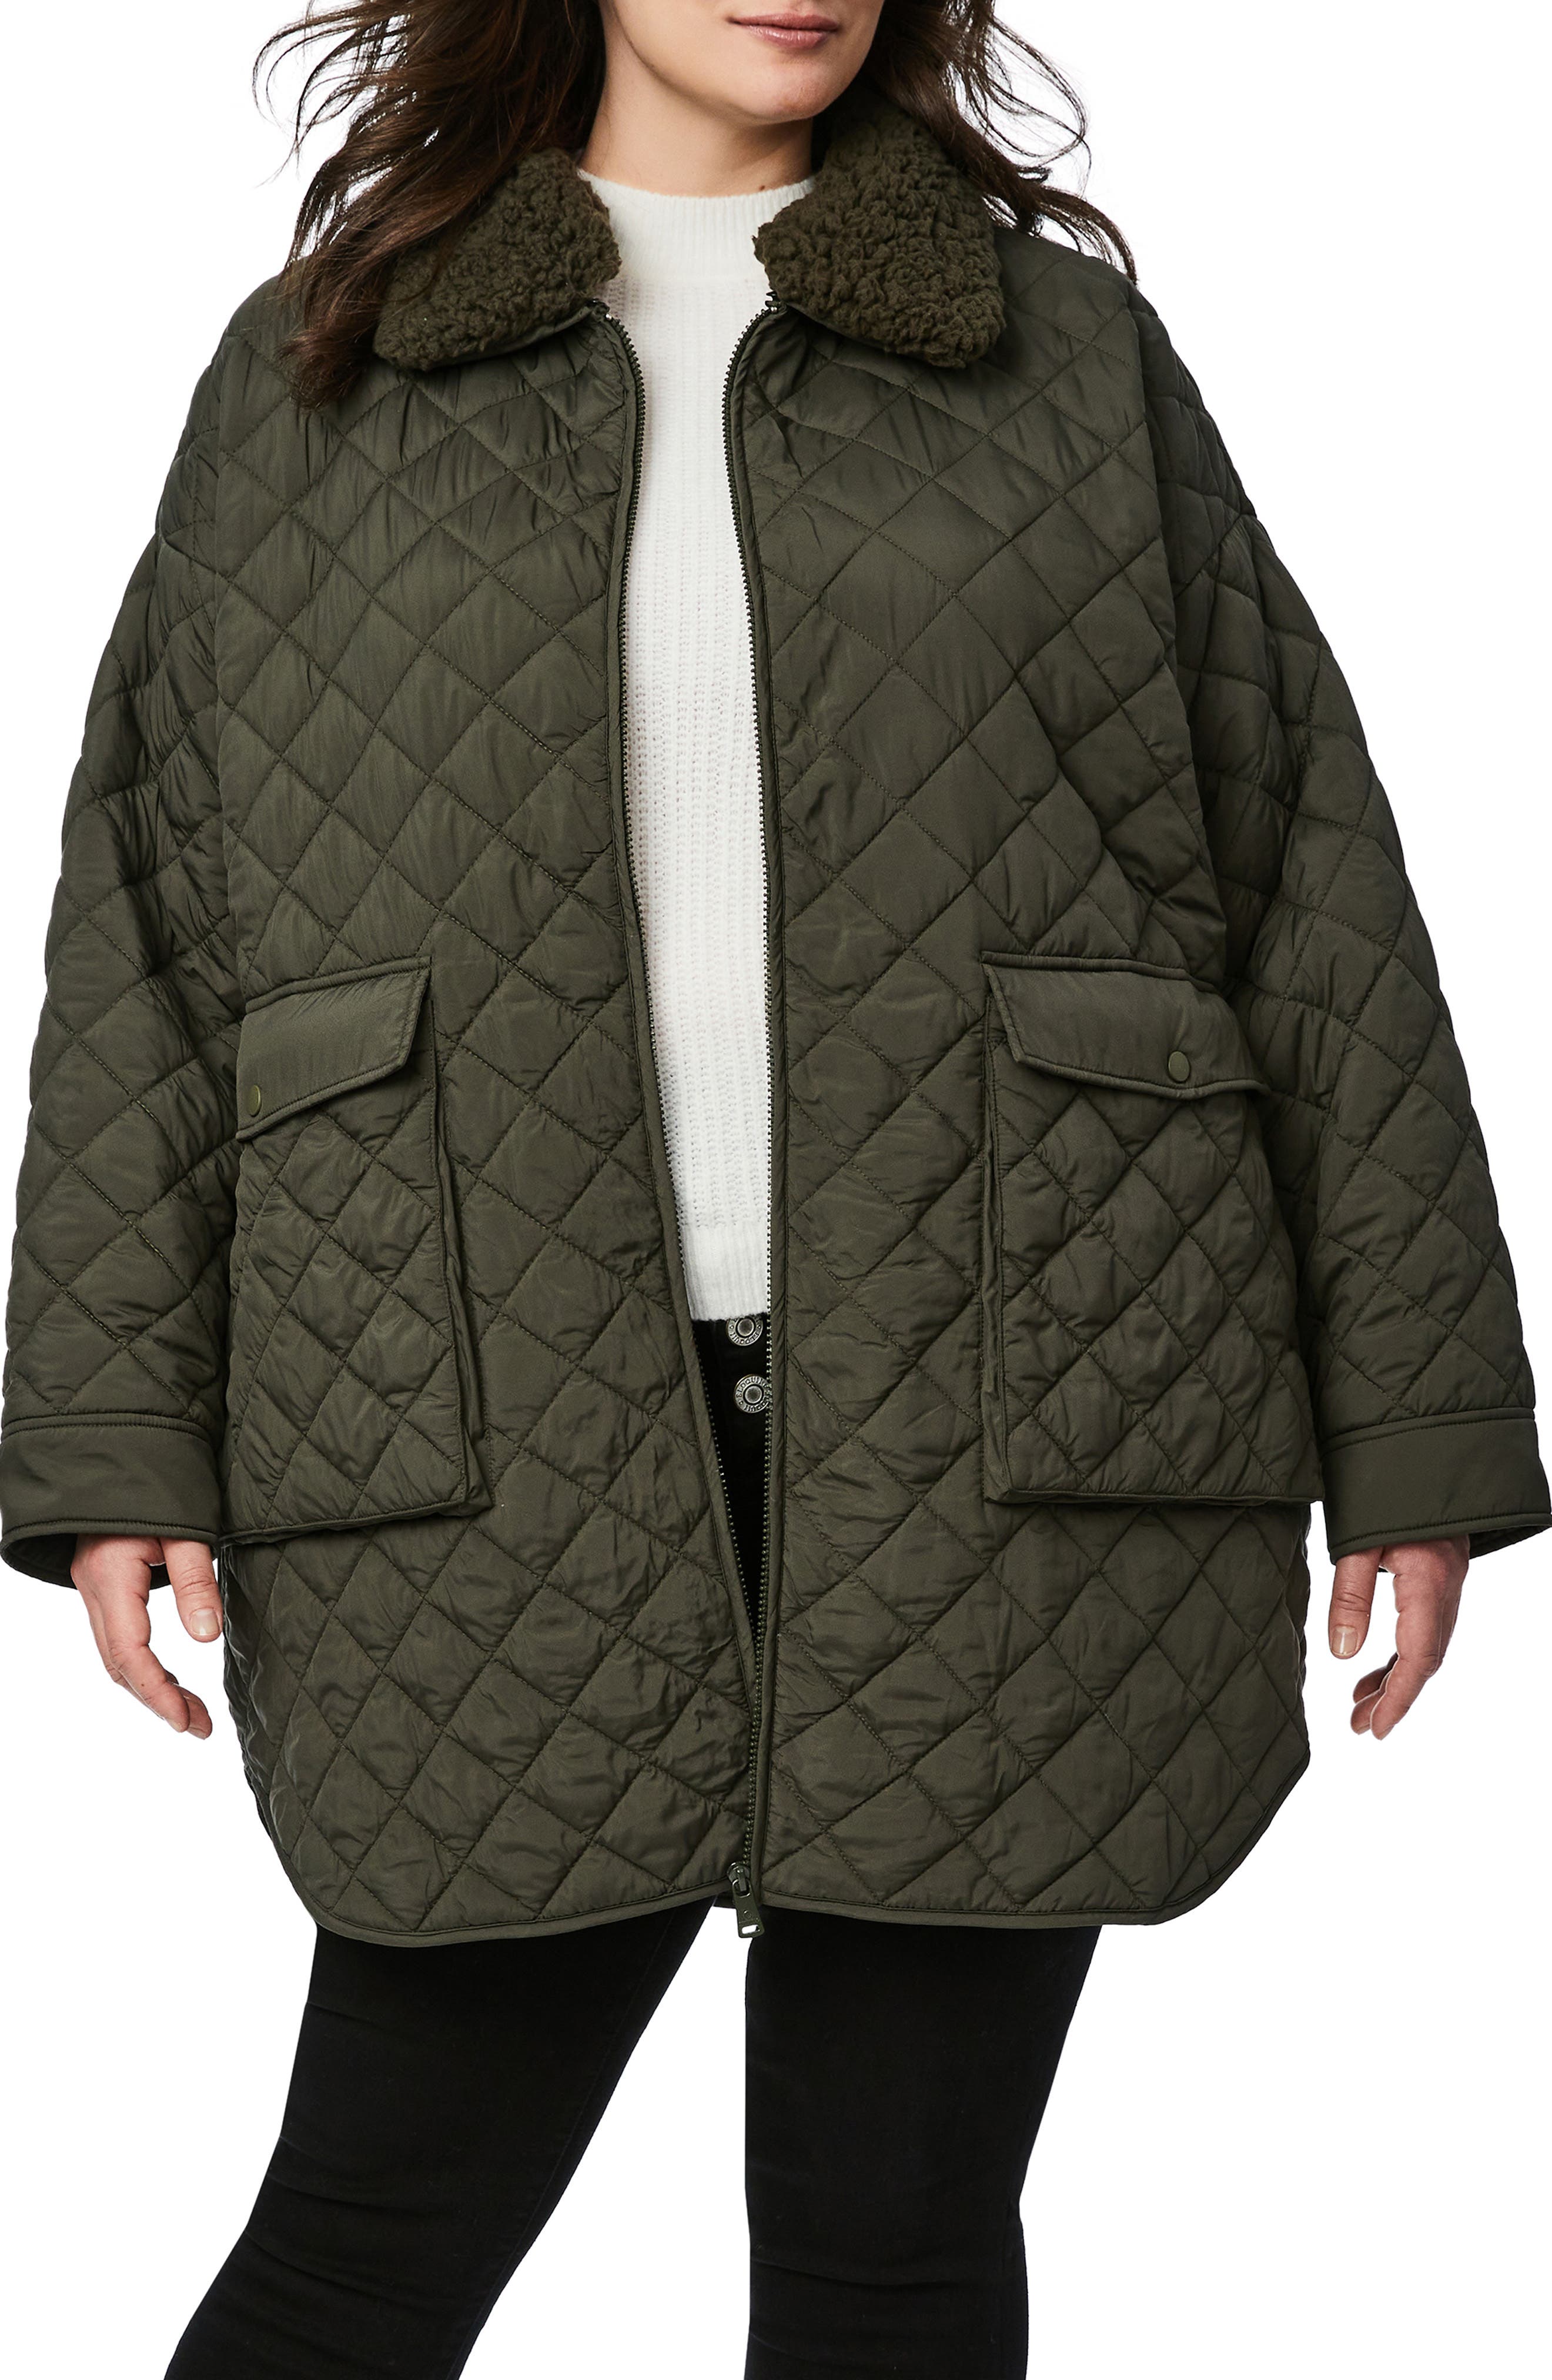 Adult Black Quilted Chunky Fleece